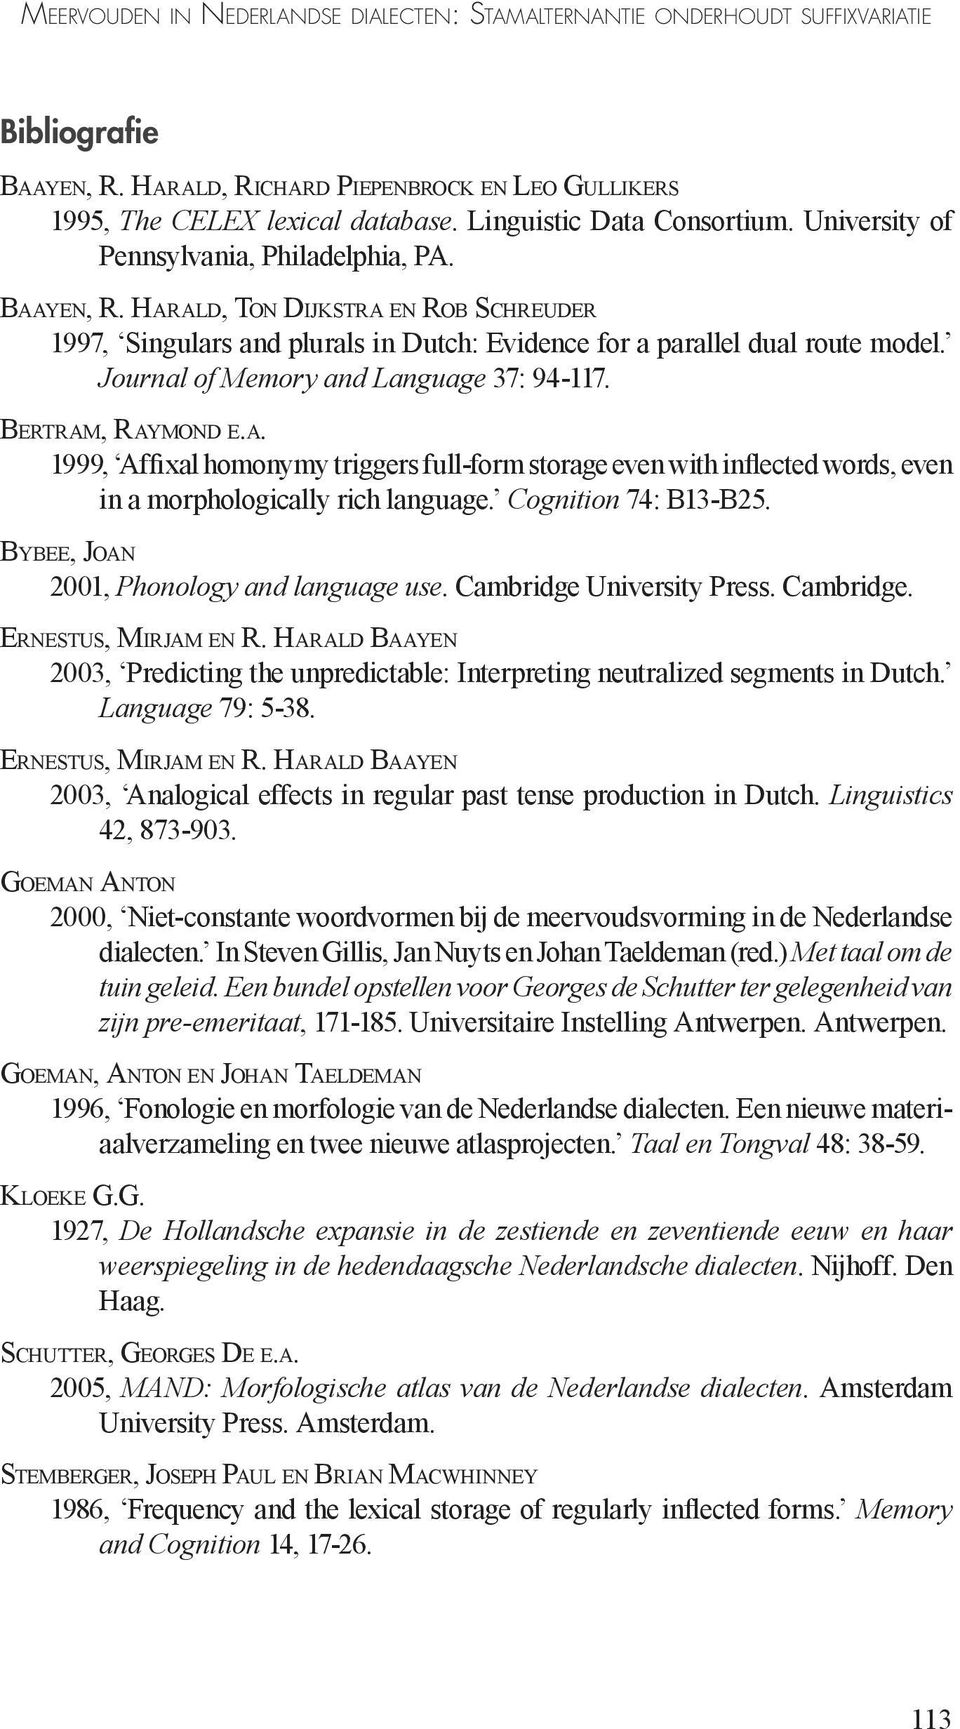 HARALD, TON DIJKSTRA EN ROB SCHREUDER 1997, Singulars and plurals in Dutch: Evidence for a parallel dual route model. Journal of Memory and Language 37: 94-117. BERTRAM, RAYMOND E.A. 1999, Affixal homonymy triggers full-form storage even with inflected words, even in a morphologically rich language.